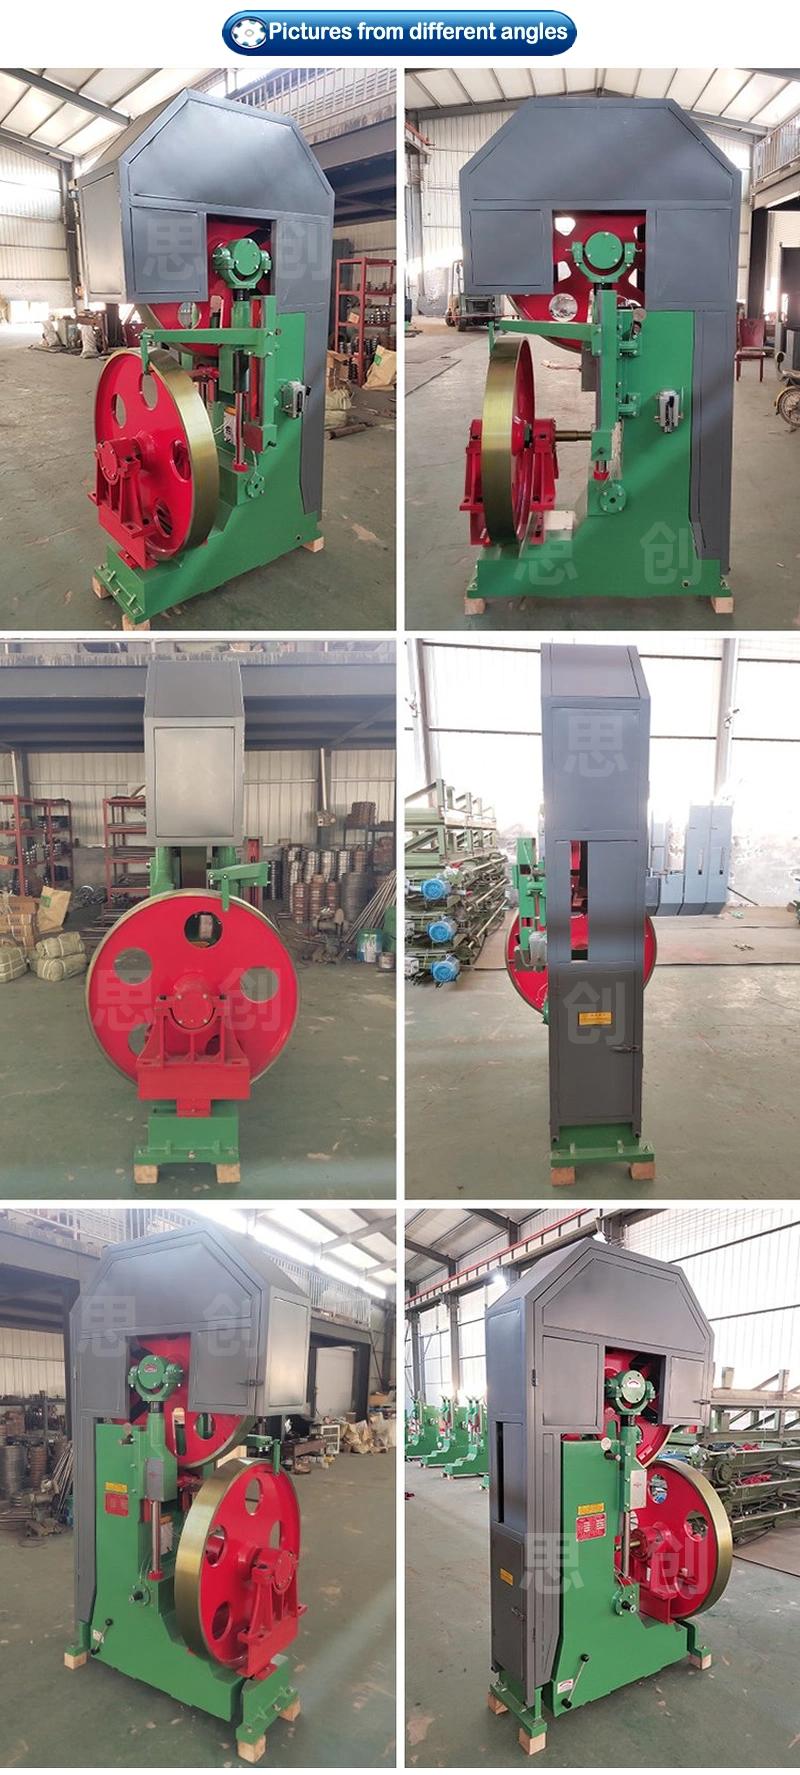 Auto Wood Timber Cutting Band Saw Machine with Log Carriage